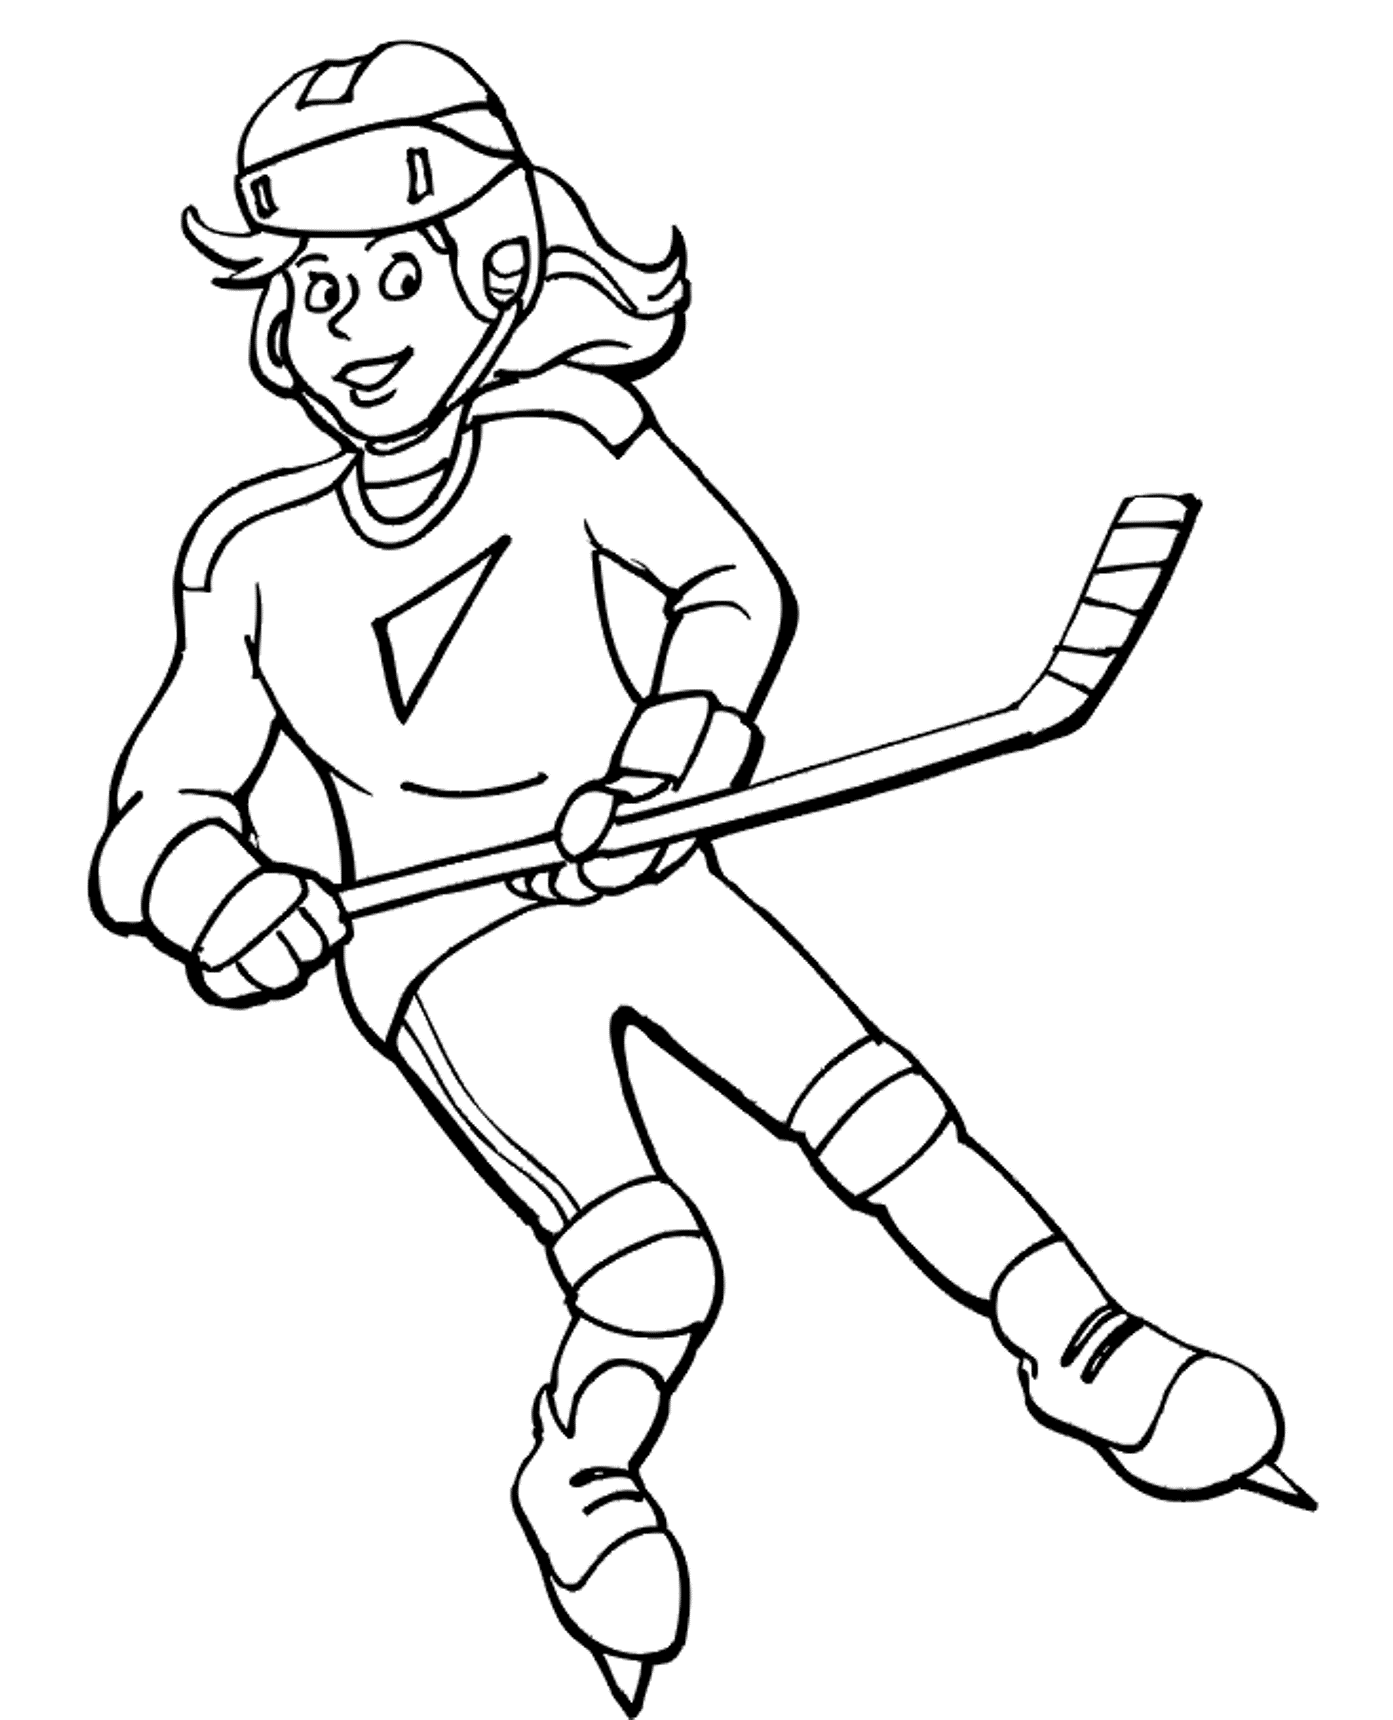 Hockey Girl Player Coloring Page